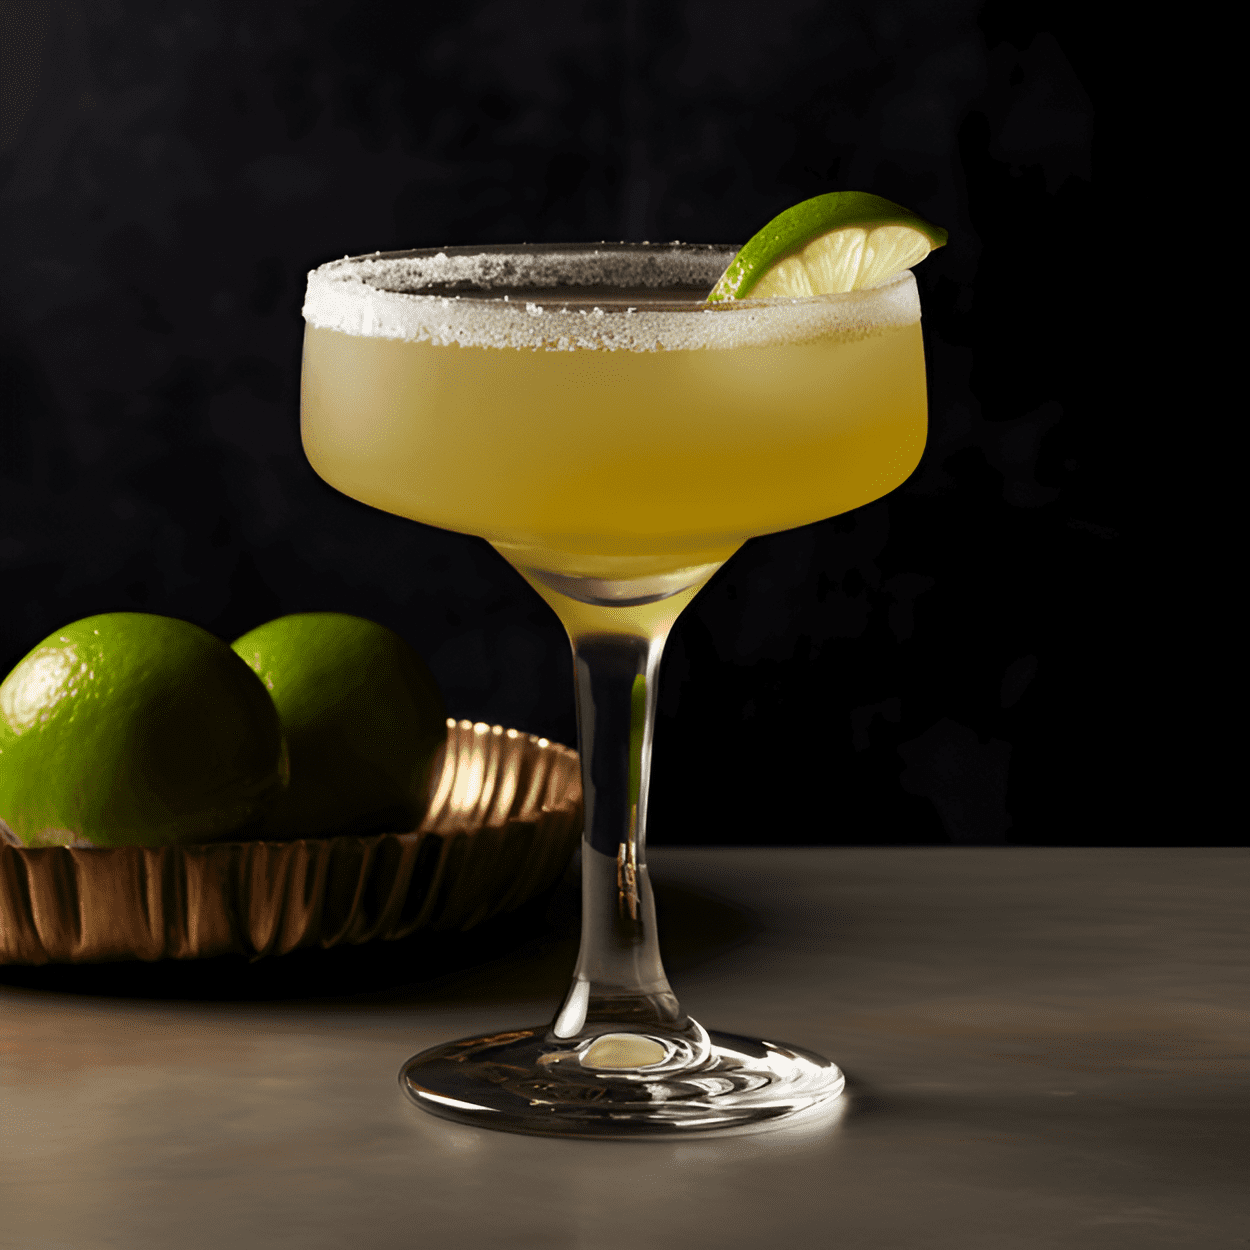 1942 Margarita Cocktail Recipe - The 1942 Margarita has a smooth, rich, and complex flavor. The Don Julio 1942 tequila gives it a deep agave flavor with notes of caramel and vanilla. It is balanced with the tartness of the lime and the sweetness of the agave syrup.